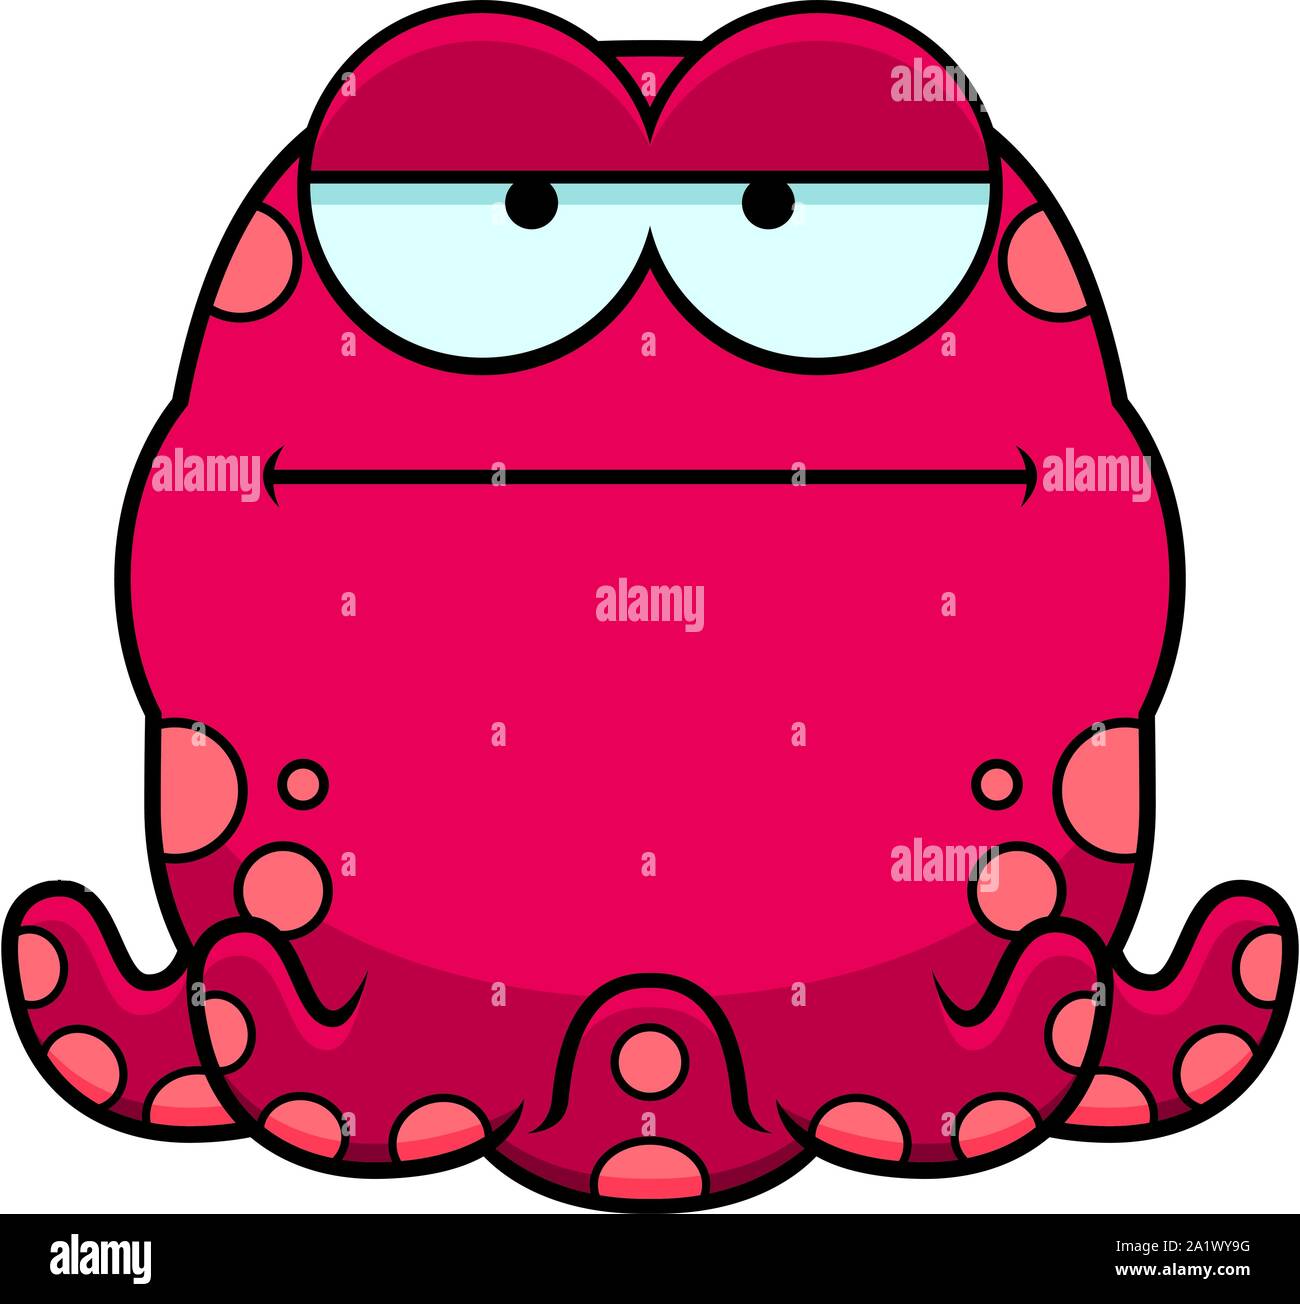 A cartoon illustration of a octopus looking bored. Stock Vector